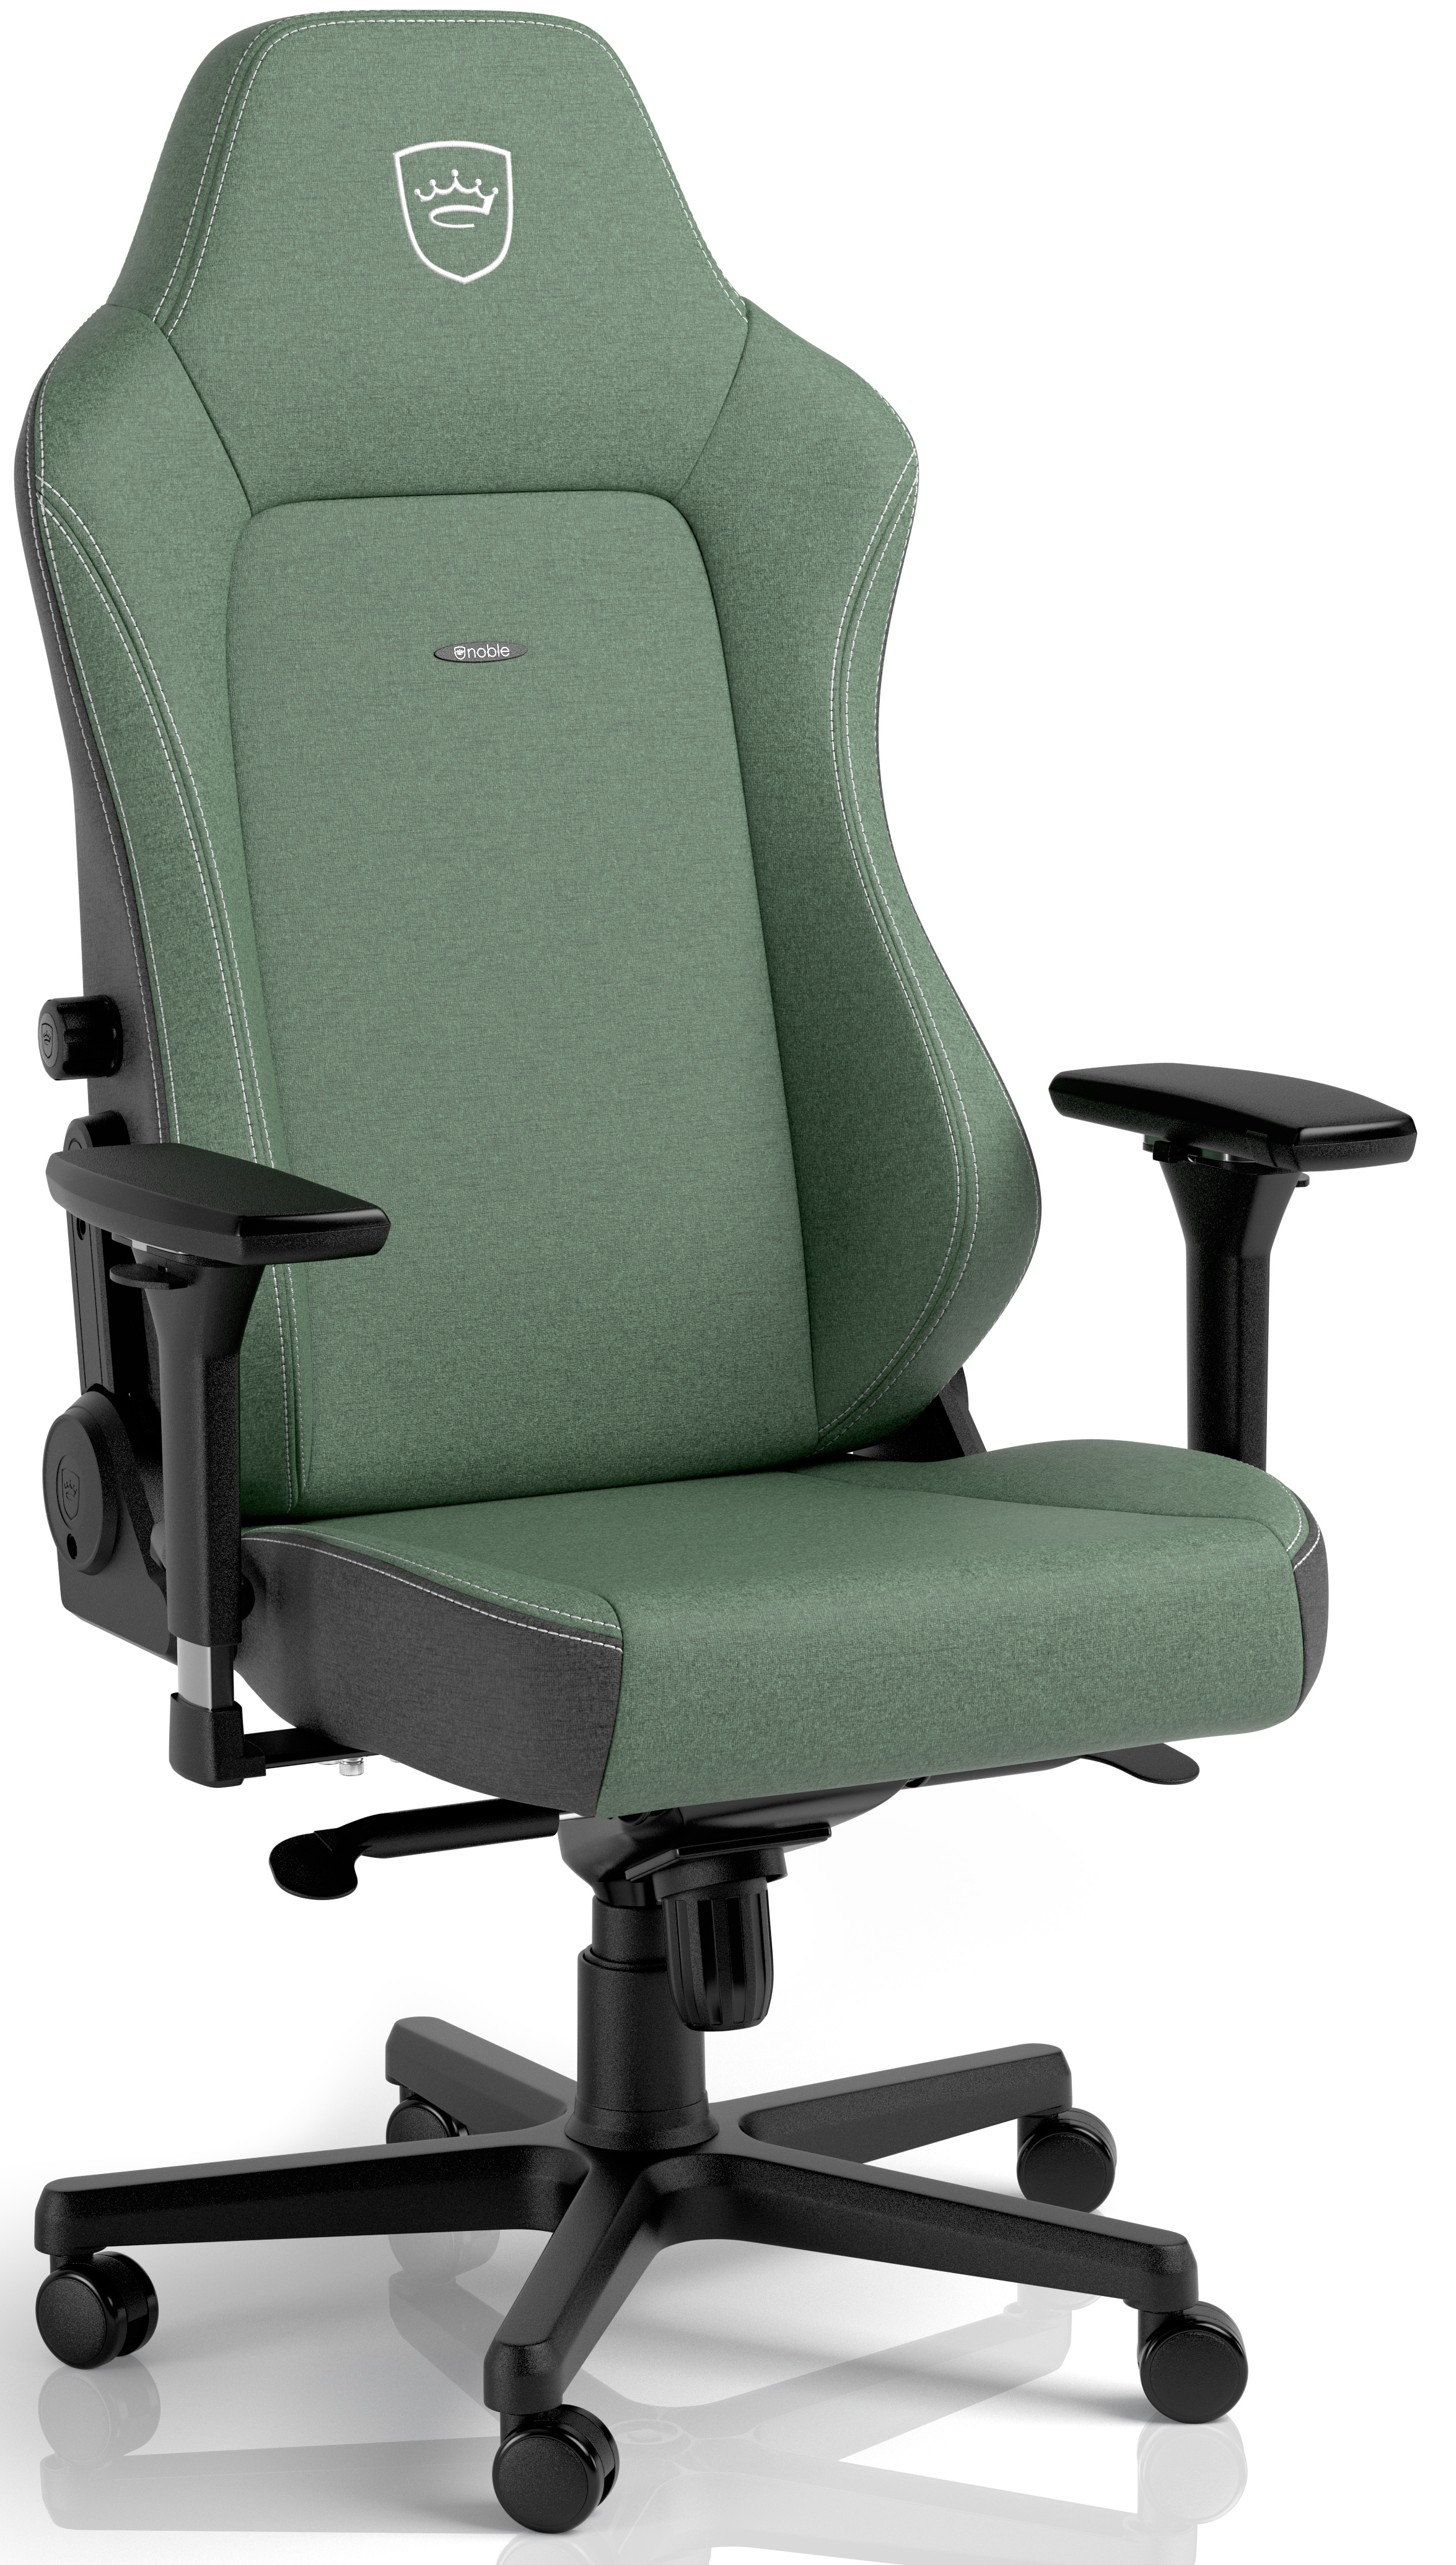 ** B Grade ** Cadeira noblechairs Hero Two Tone - Green Limited Edition